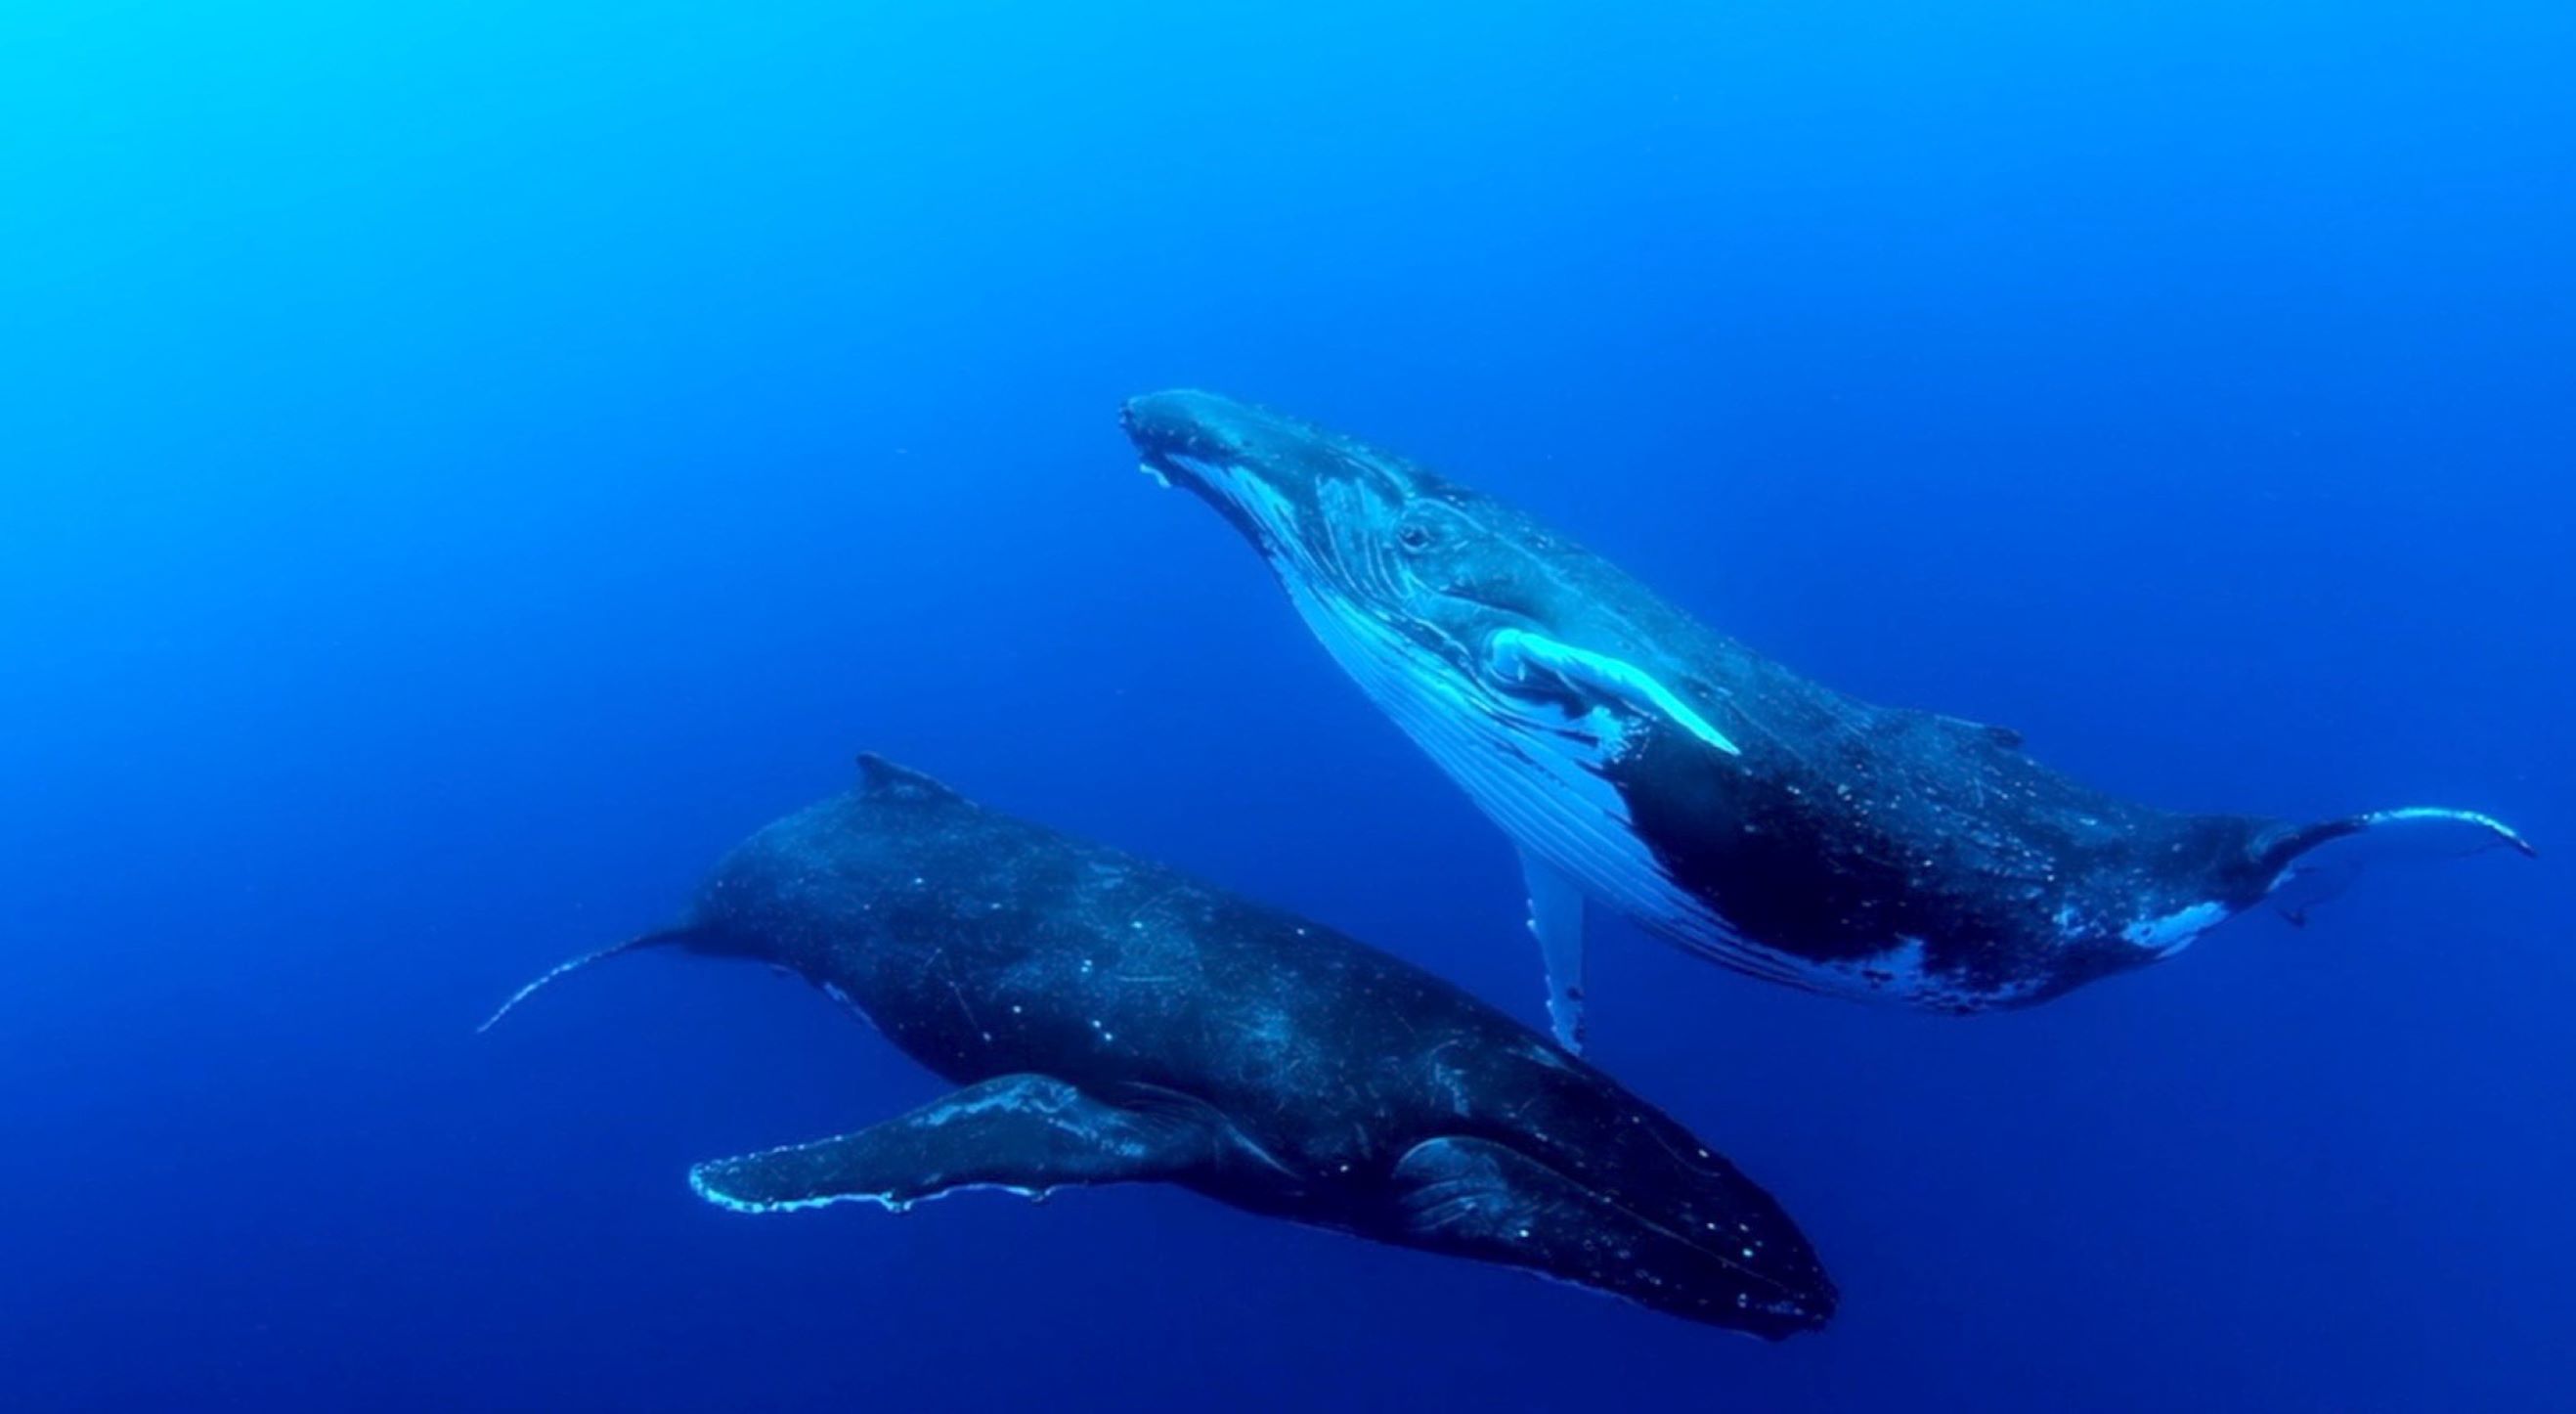 two whales in the ocean surrounded by deep blue water